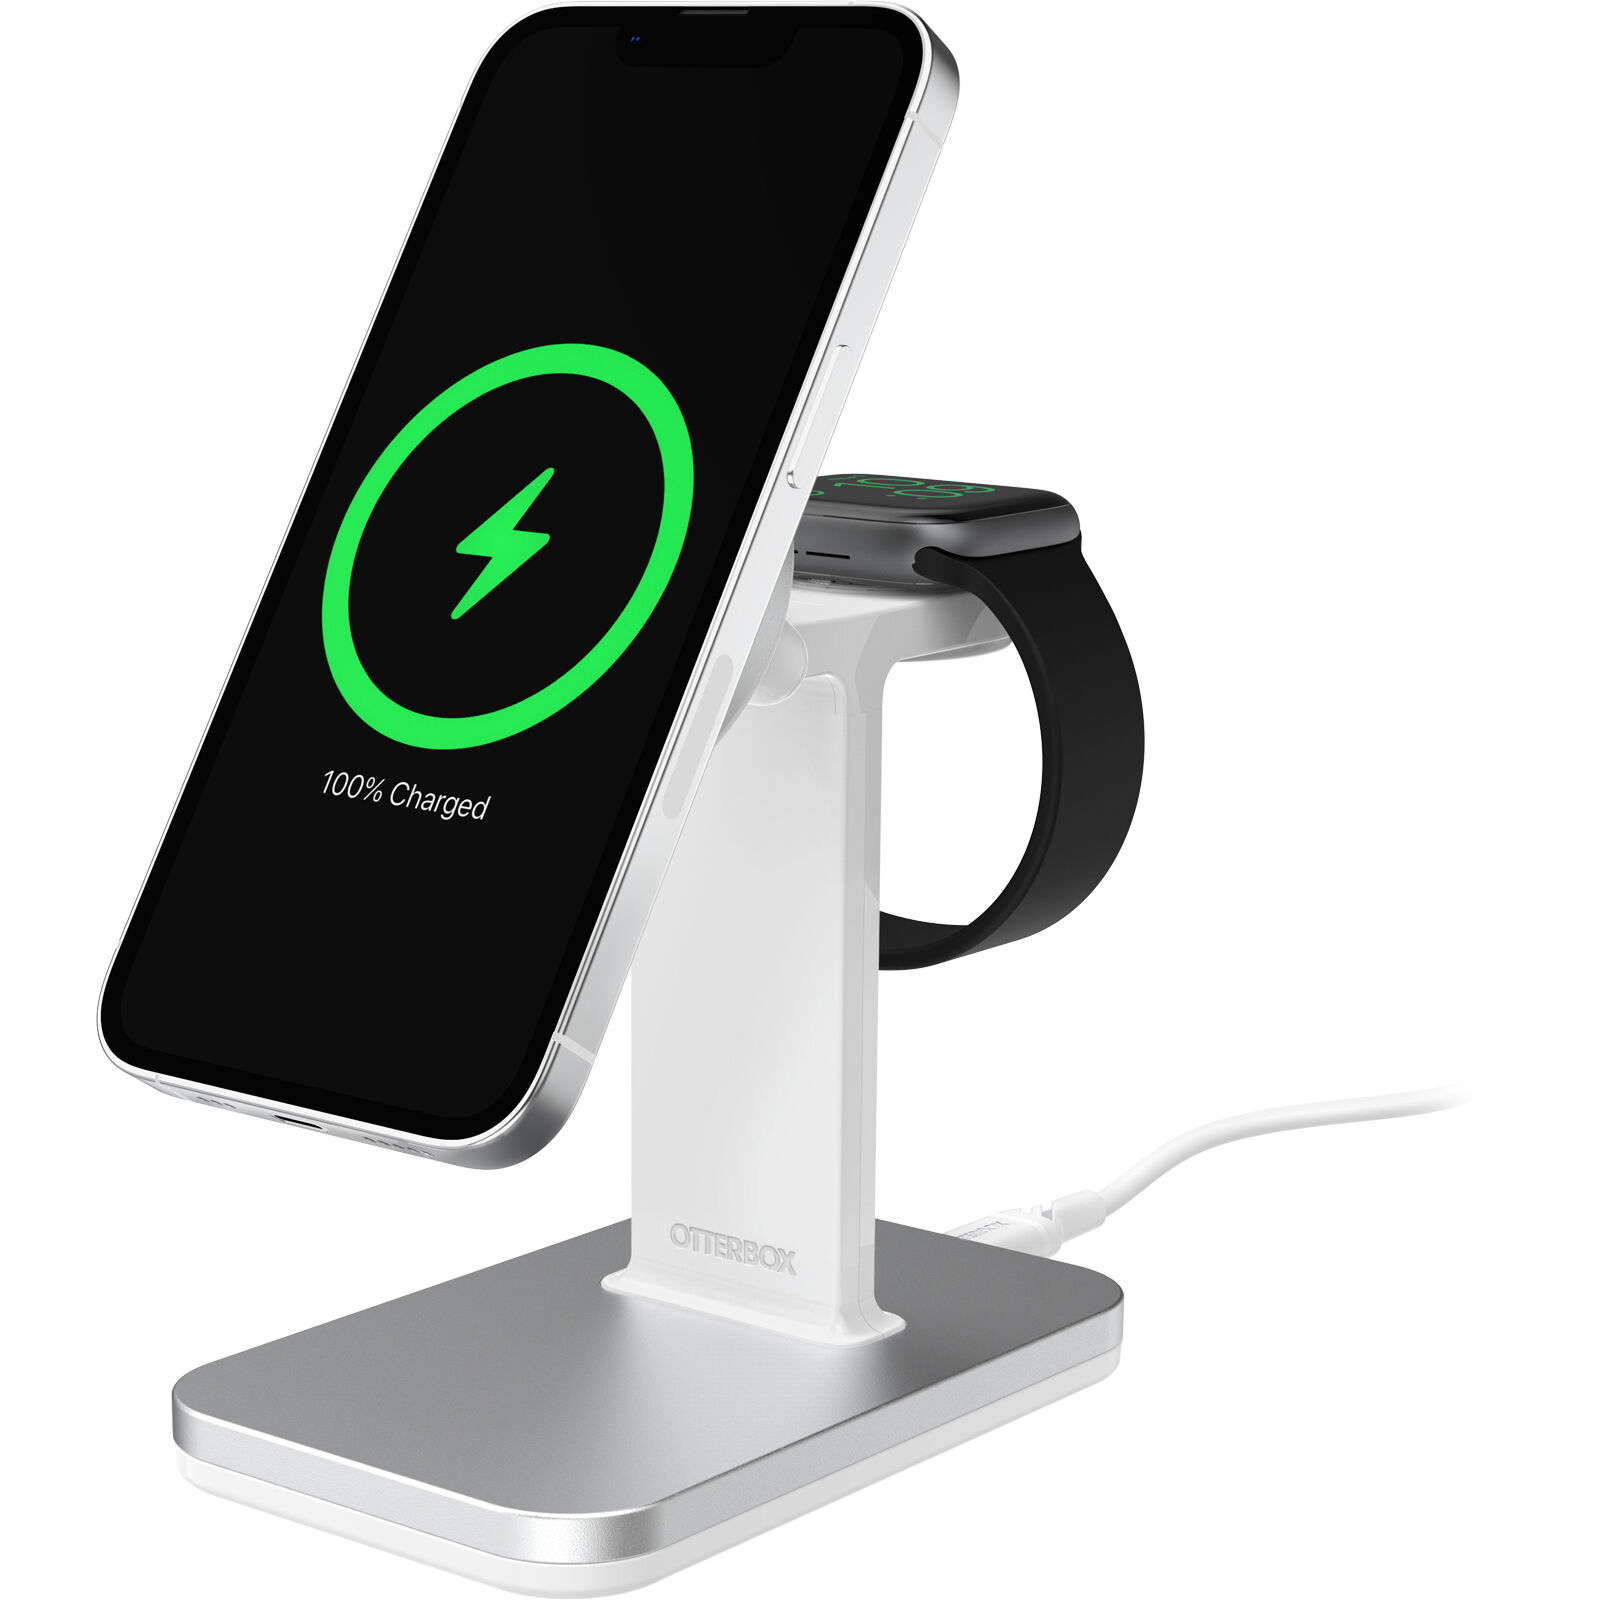 2-in-1 Charging Station for MagSafe | Space saving, multi device 